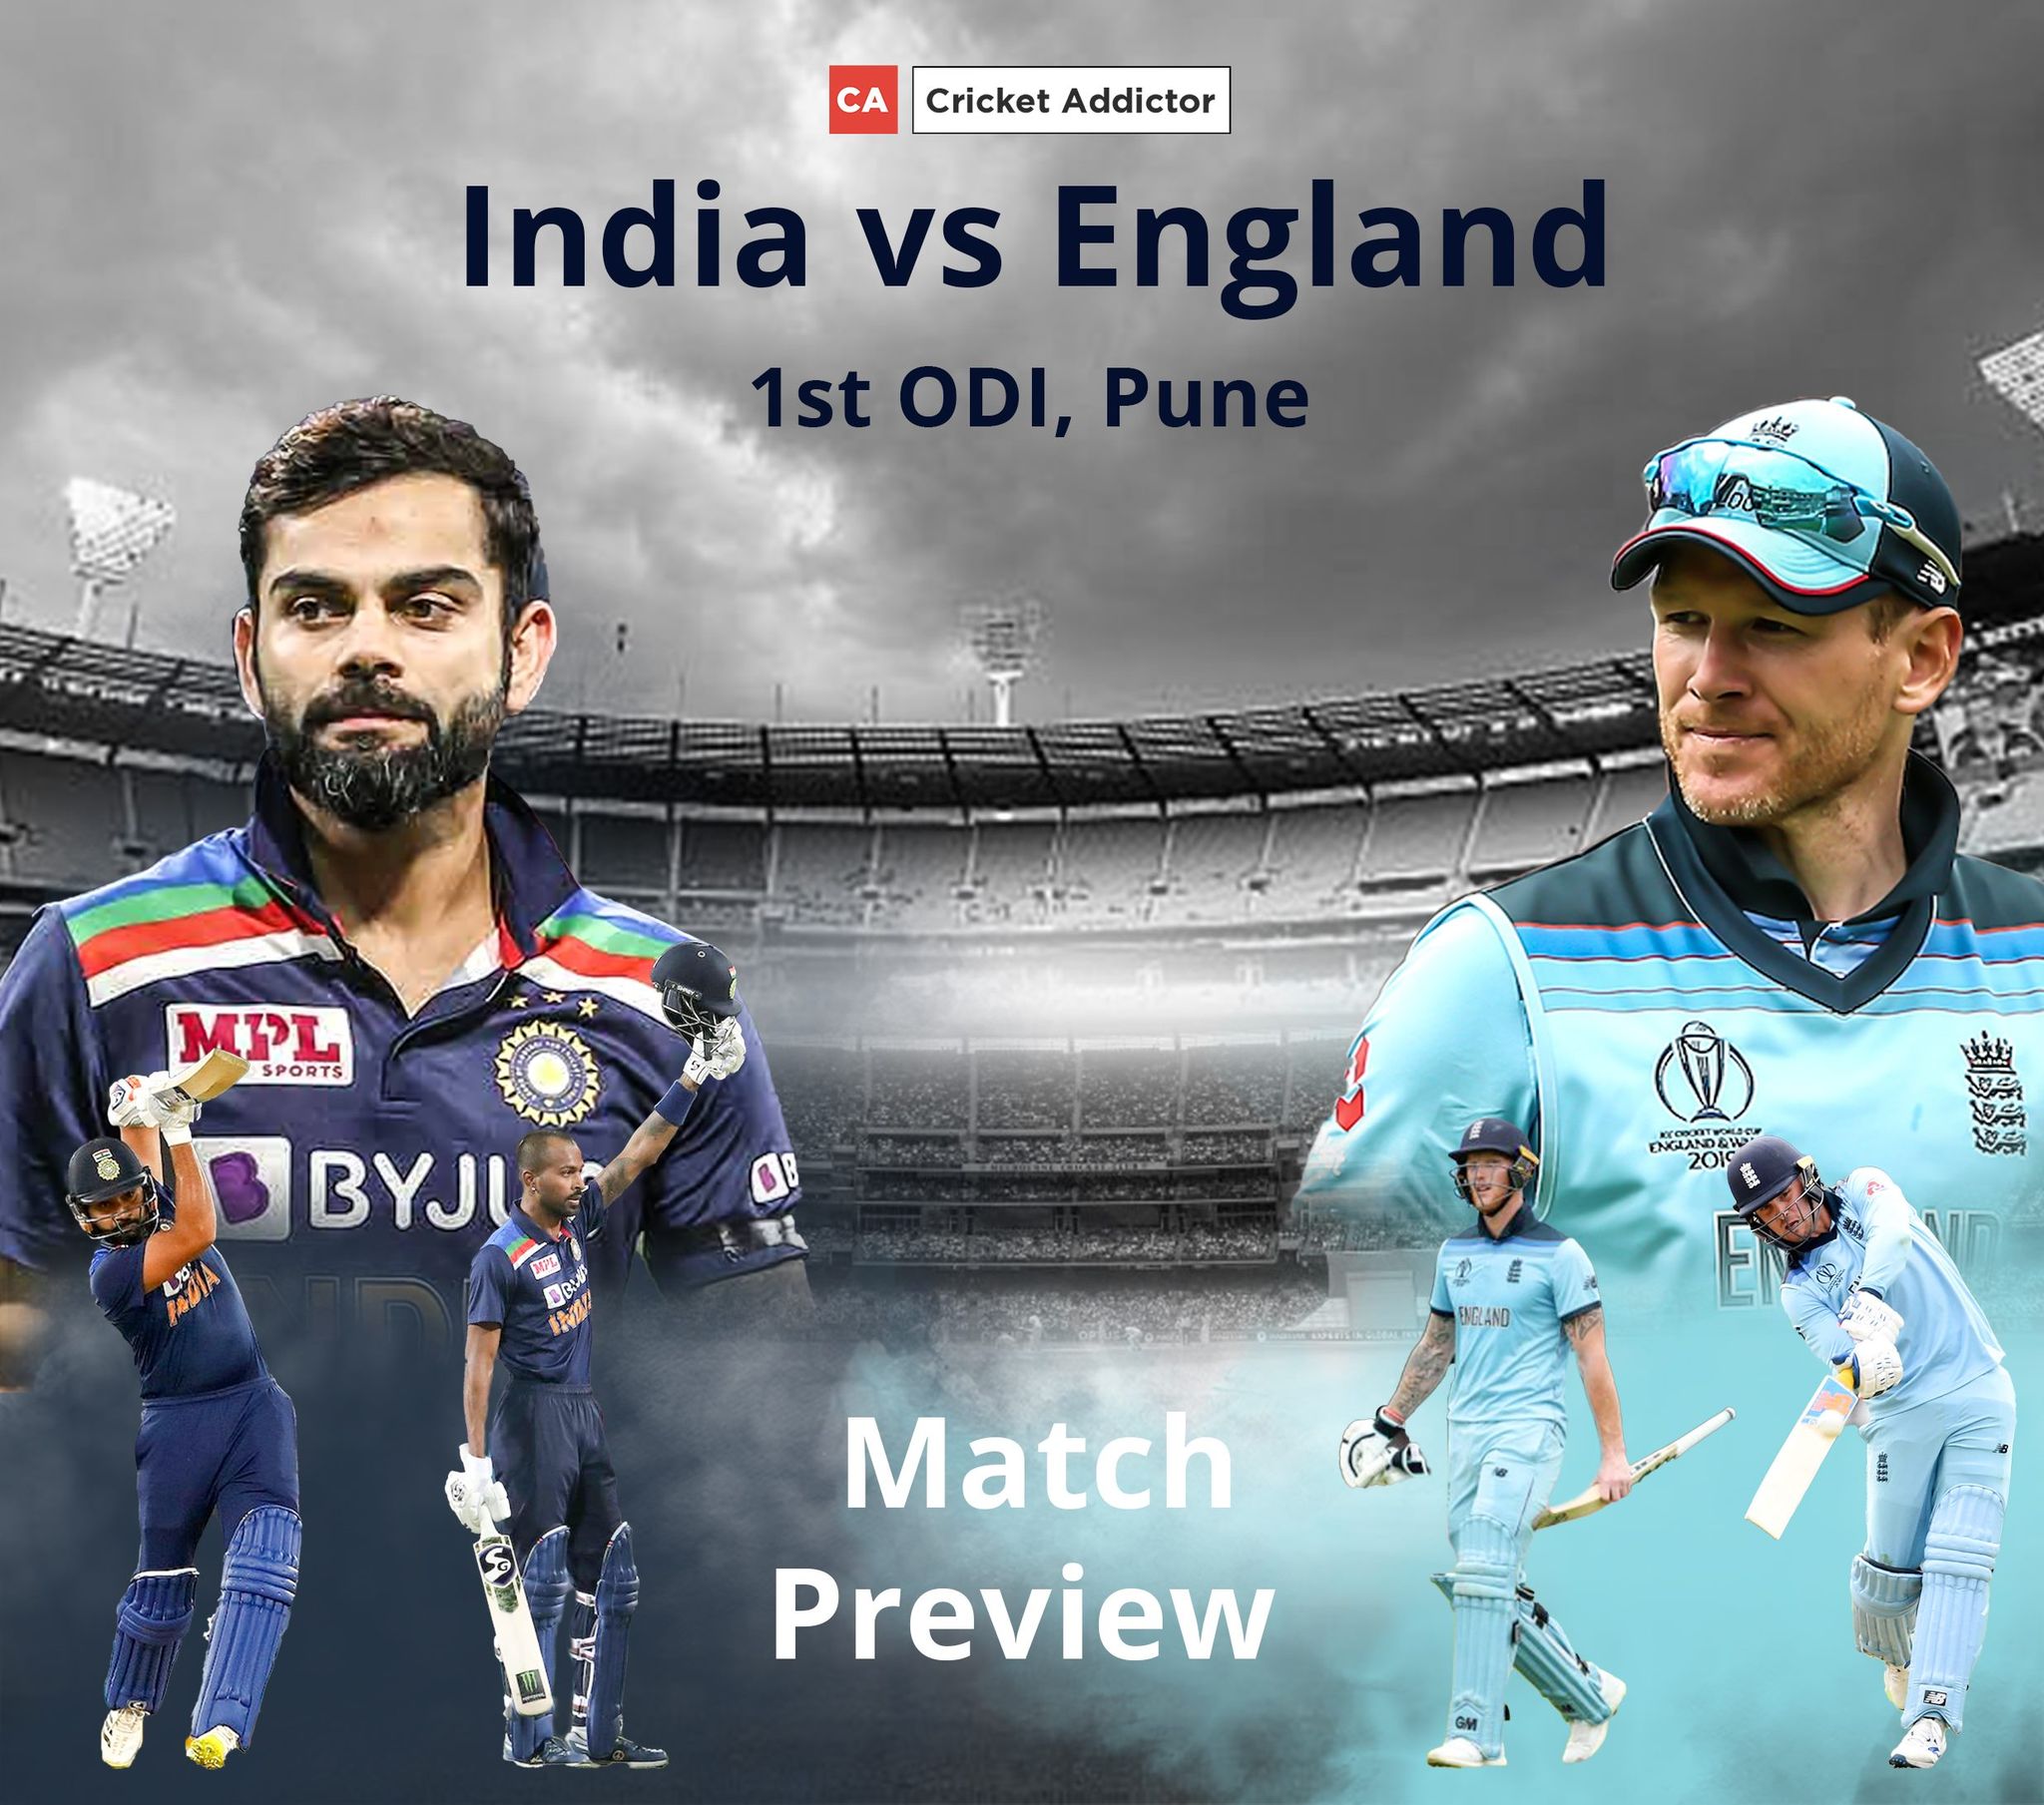 India vs England 2021, 1st ODI: Match Preview And Prediction